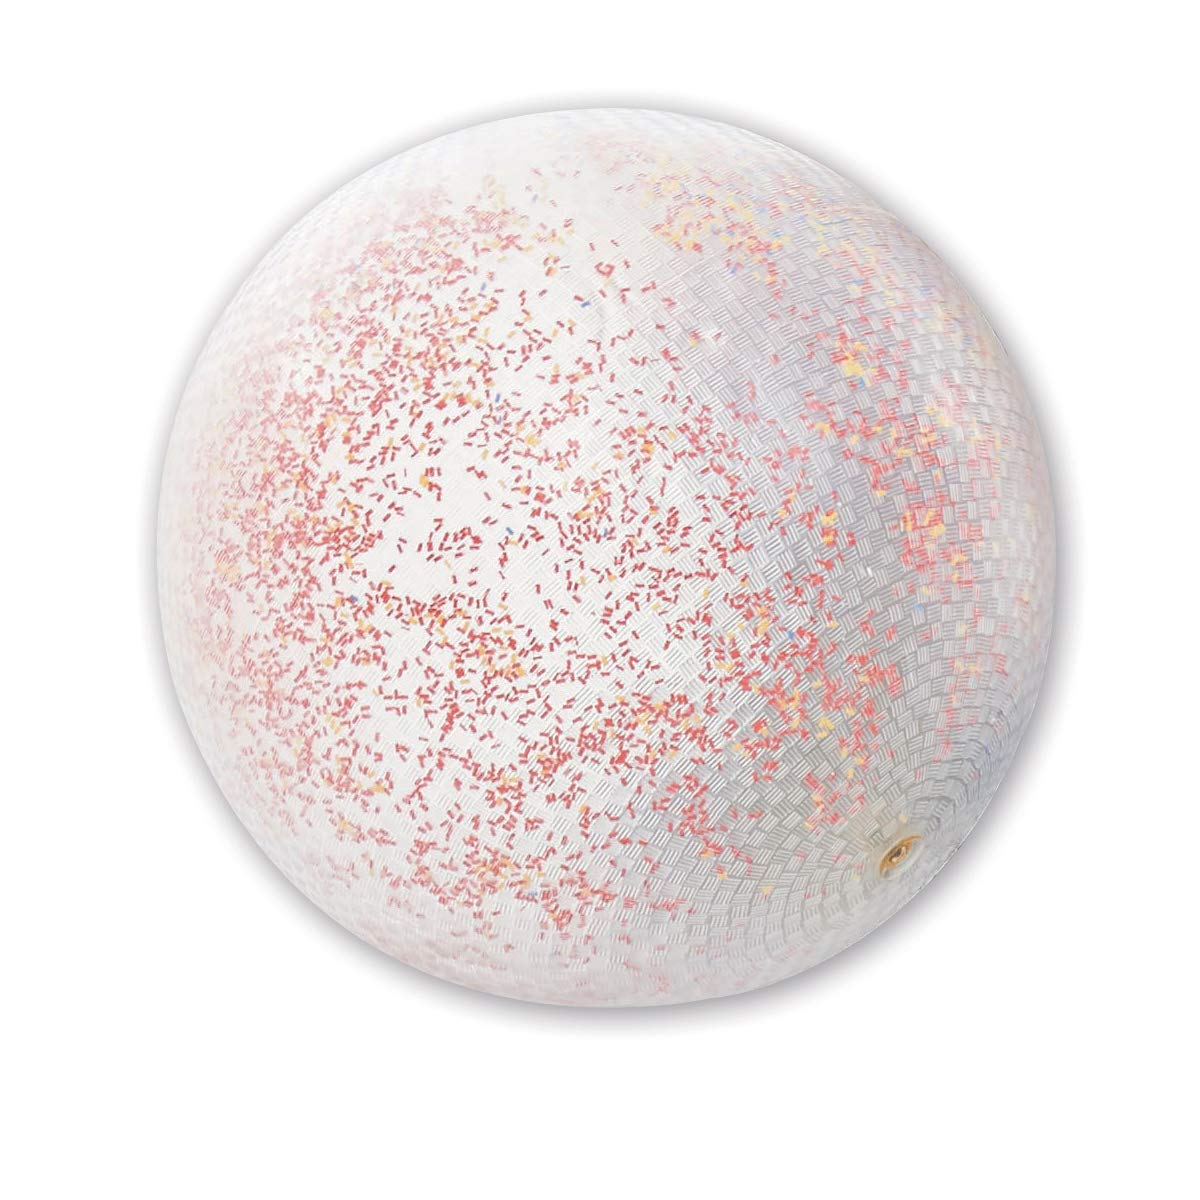 TickiT - 75045 Constellation Ball - Learn to Throw &amp; Catch - Tactile Learning Balls - Sensory Ball